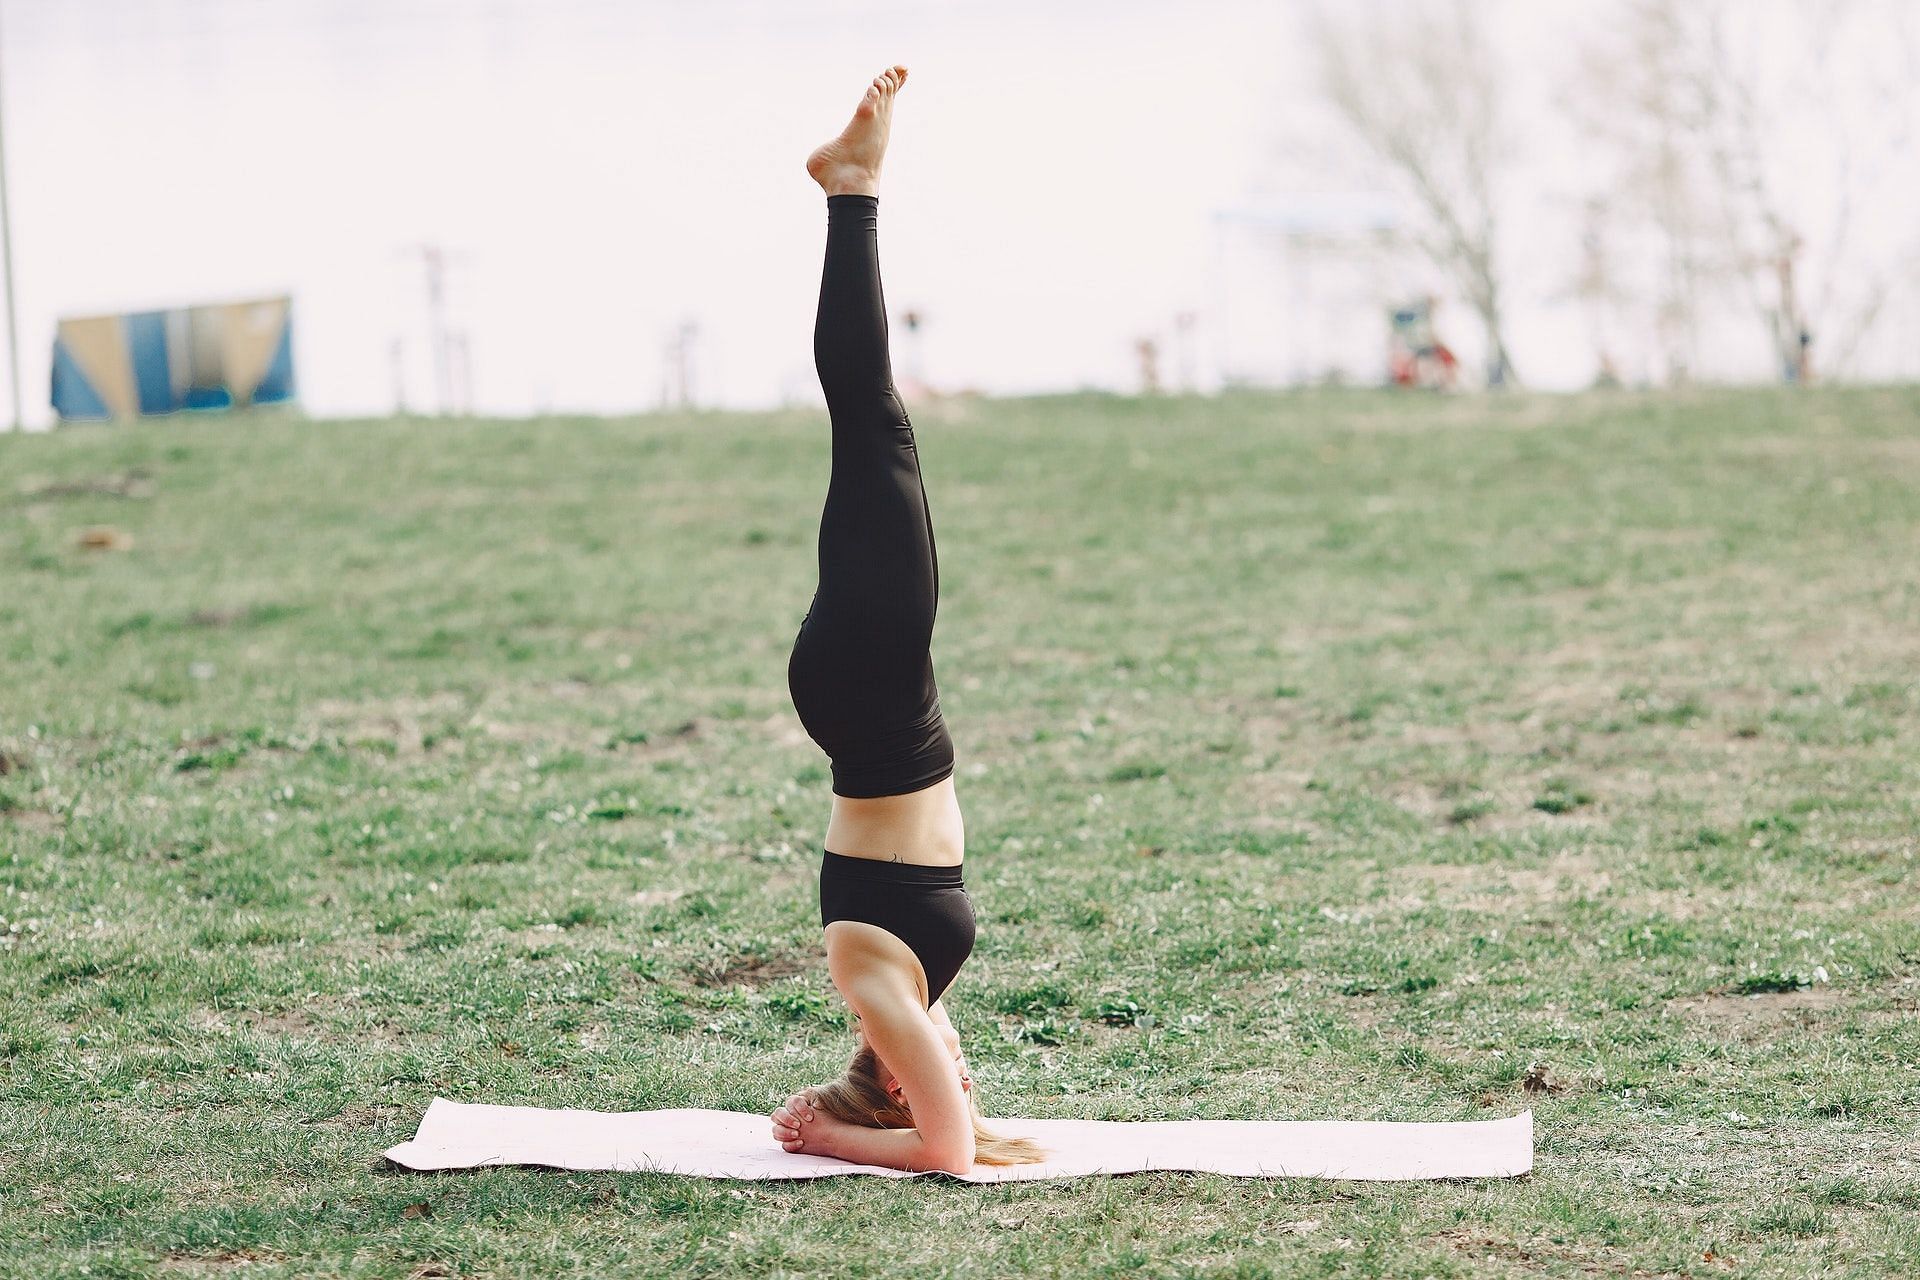 The Yogshala Clinic - 𝐒𝐡𝐢𝐫𝐬𝐡𝐚𝐬𝐚𝐧𝐚, also known as headstand, is a yoga  pose where you stand upside down on the top of your head. This asana has  the potential to vastly improve